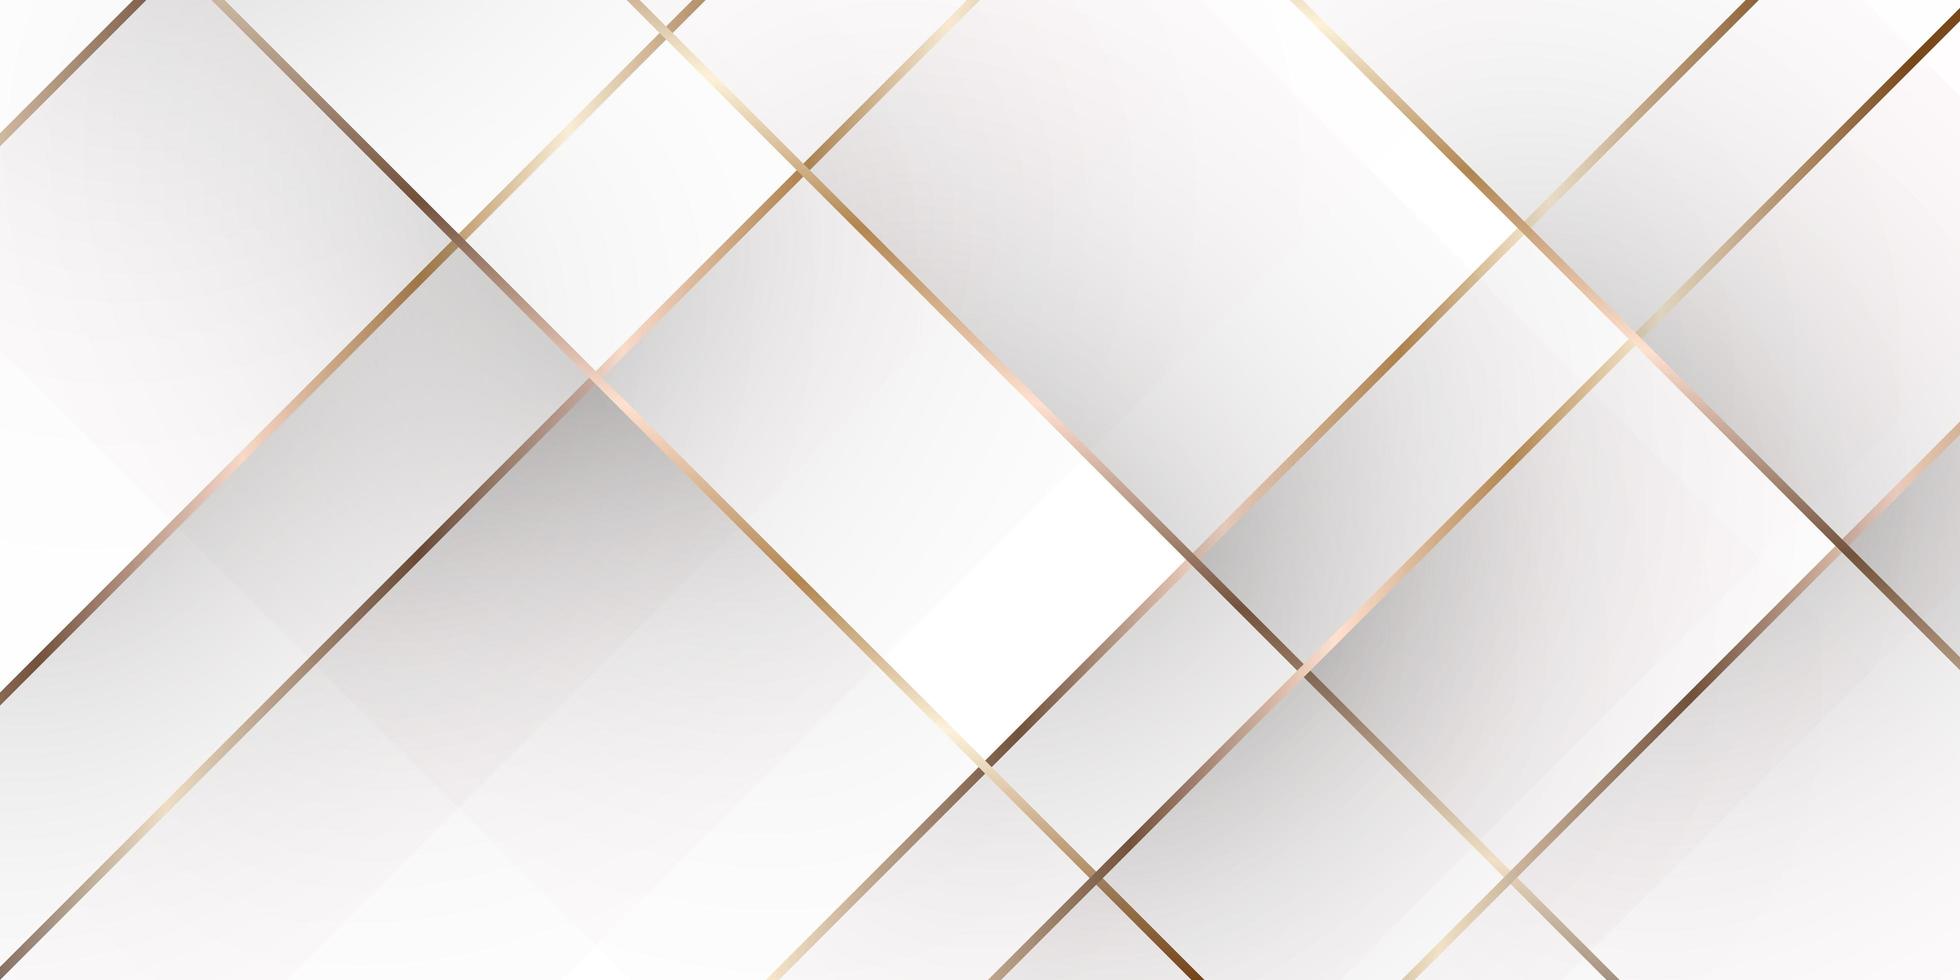 Abstract white gold luxury background Vector illustration